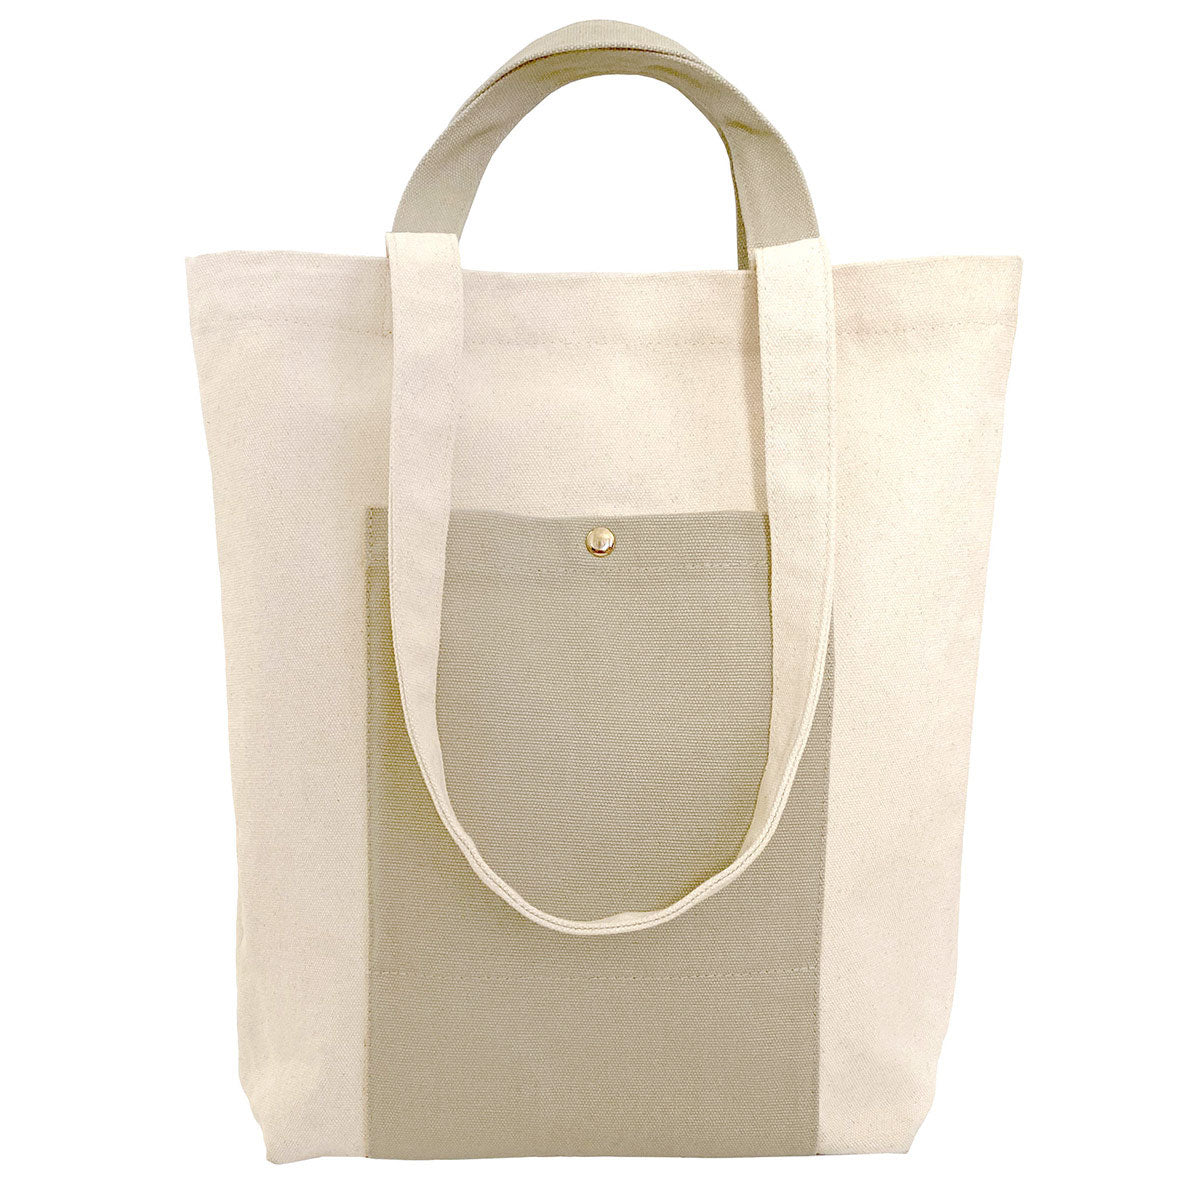 Canvas Tote Bag with Handles (Tan)